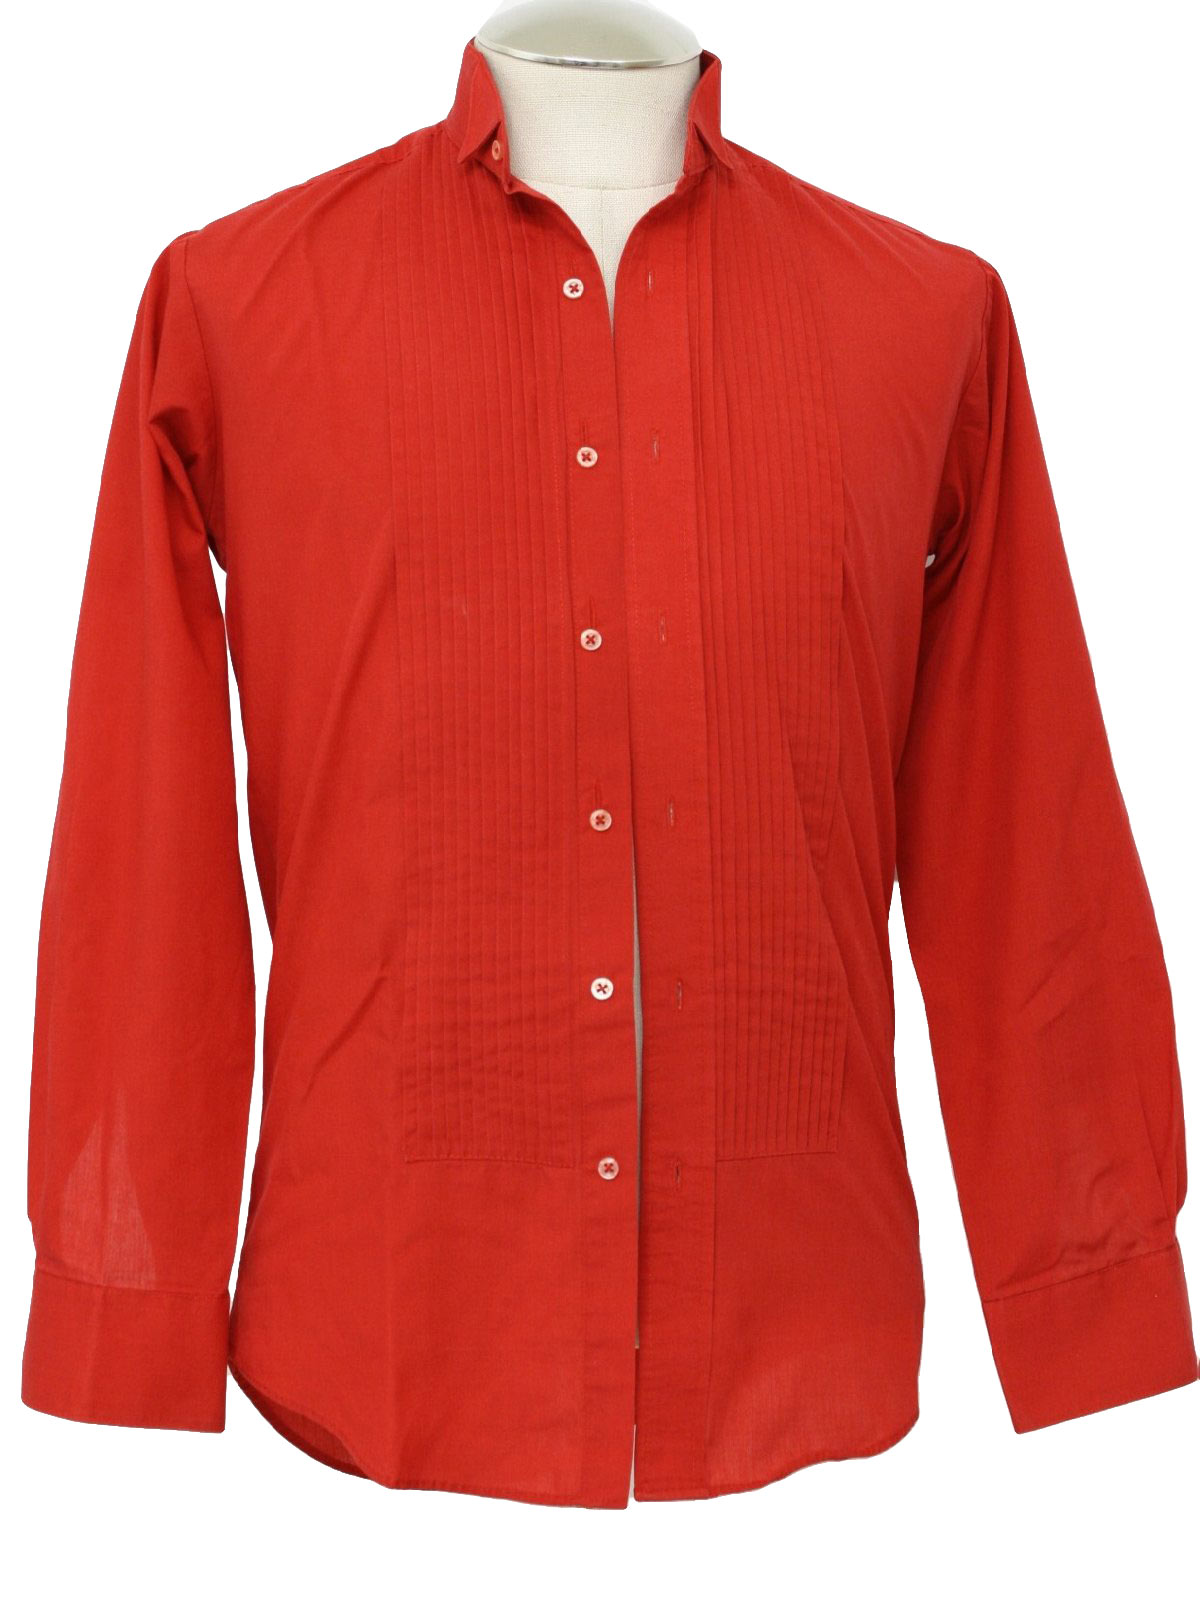 Retro 1980s Shirt: 80s -Classic- Mens red polyester cotton broadcloth ...